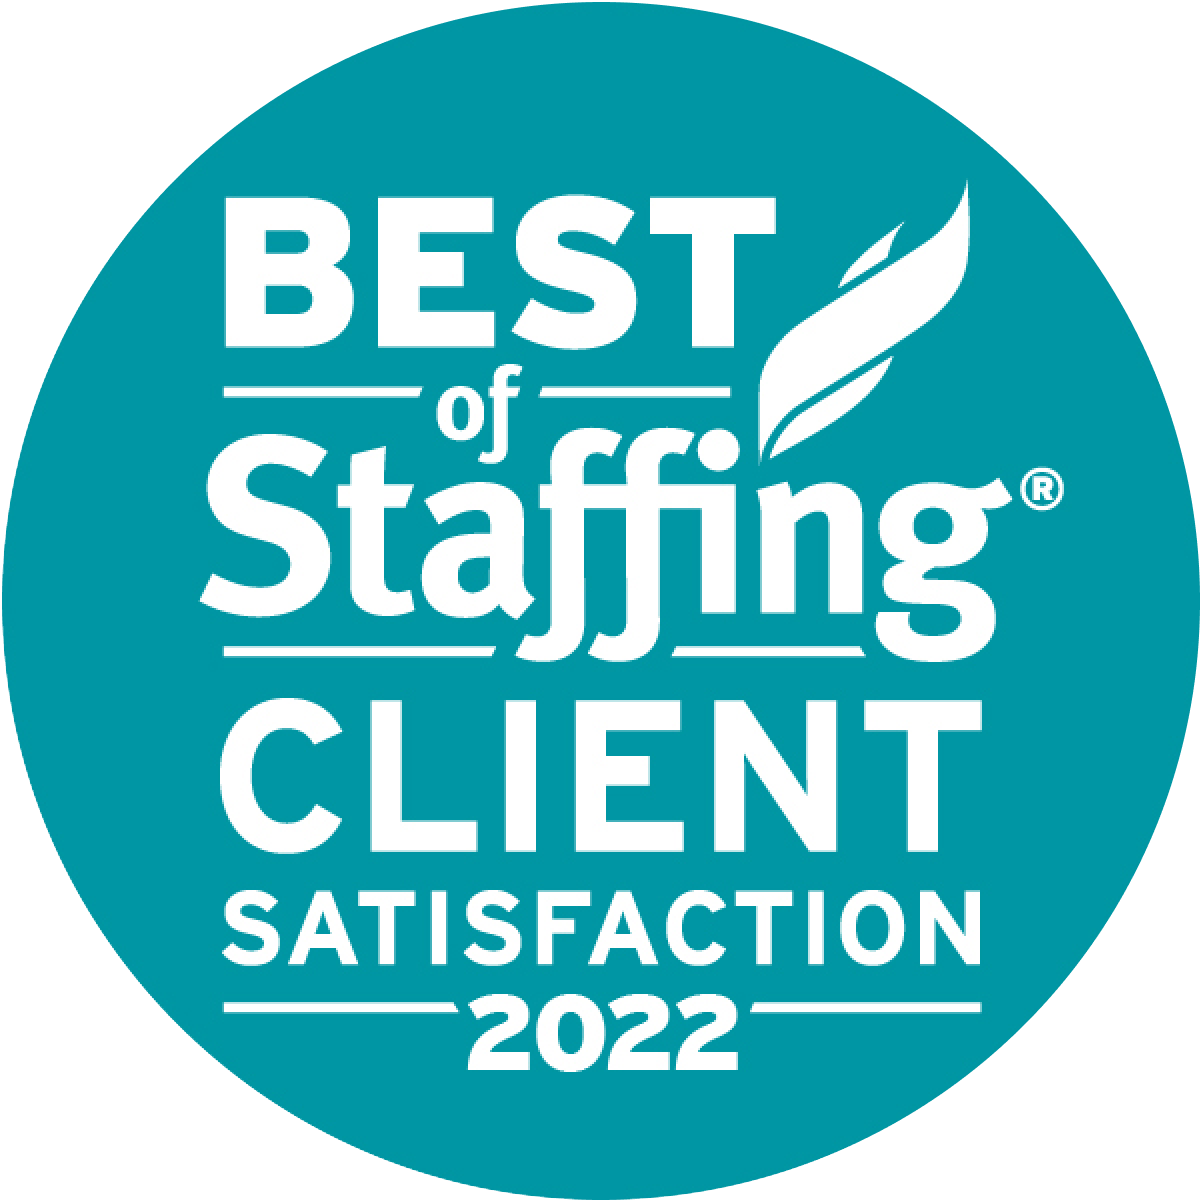 This is a badge for Snelling Staffing Agency winning “Best of Staffing Client Satisfaction 2022” award in 2022.